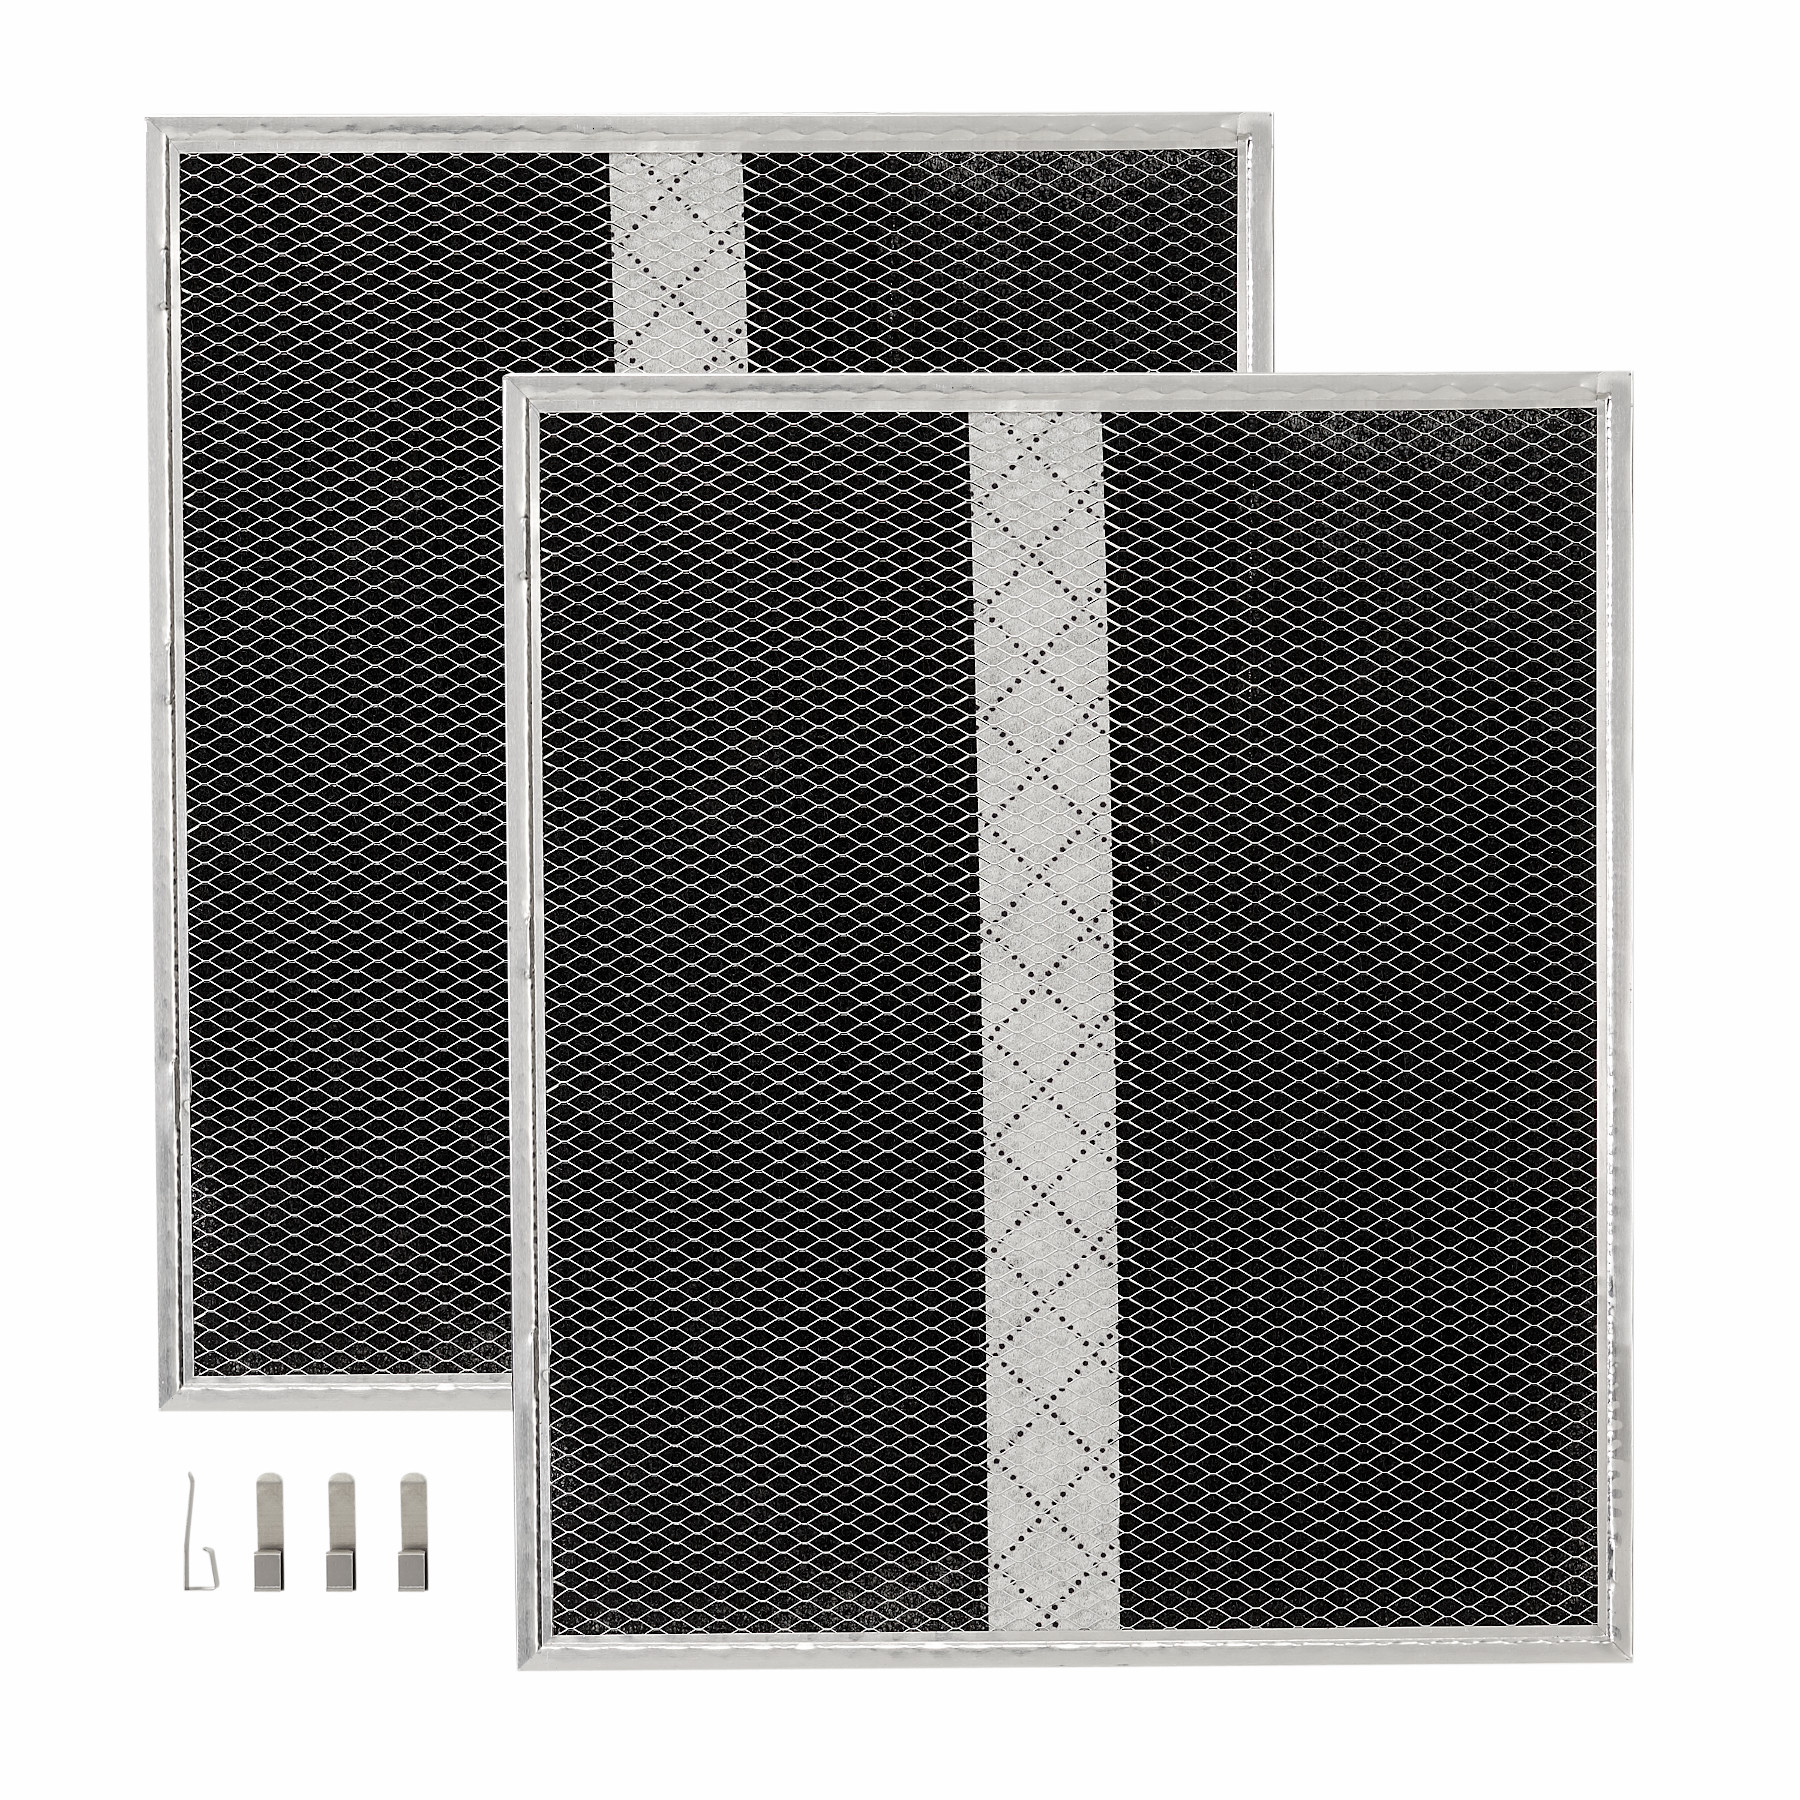 Mantra/Osmos/Glacier Series Type XC Ductless Range Hood Replacement Filters for Dual Filter Models